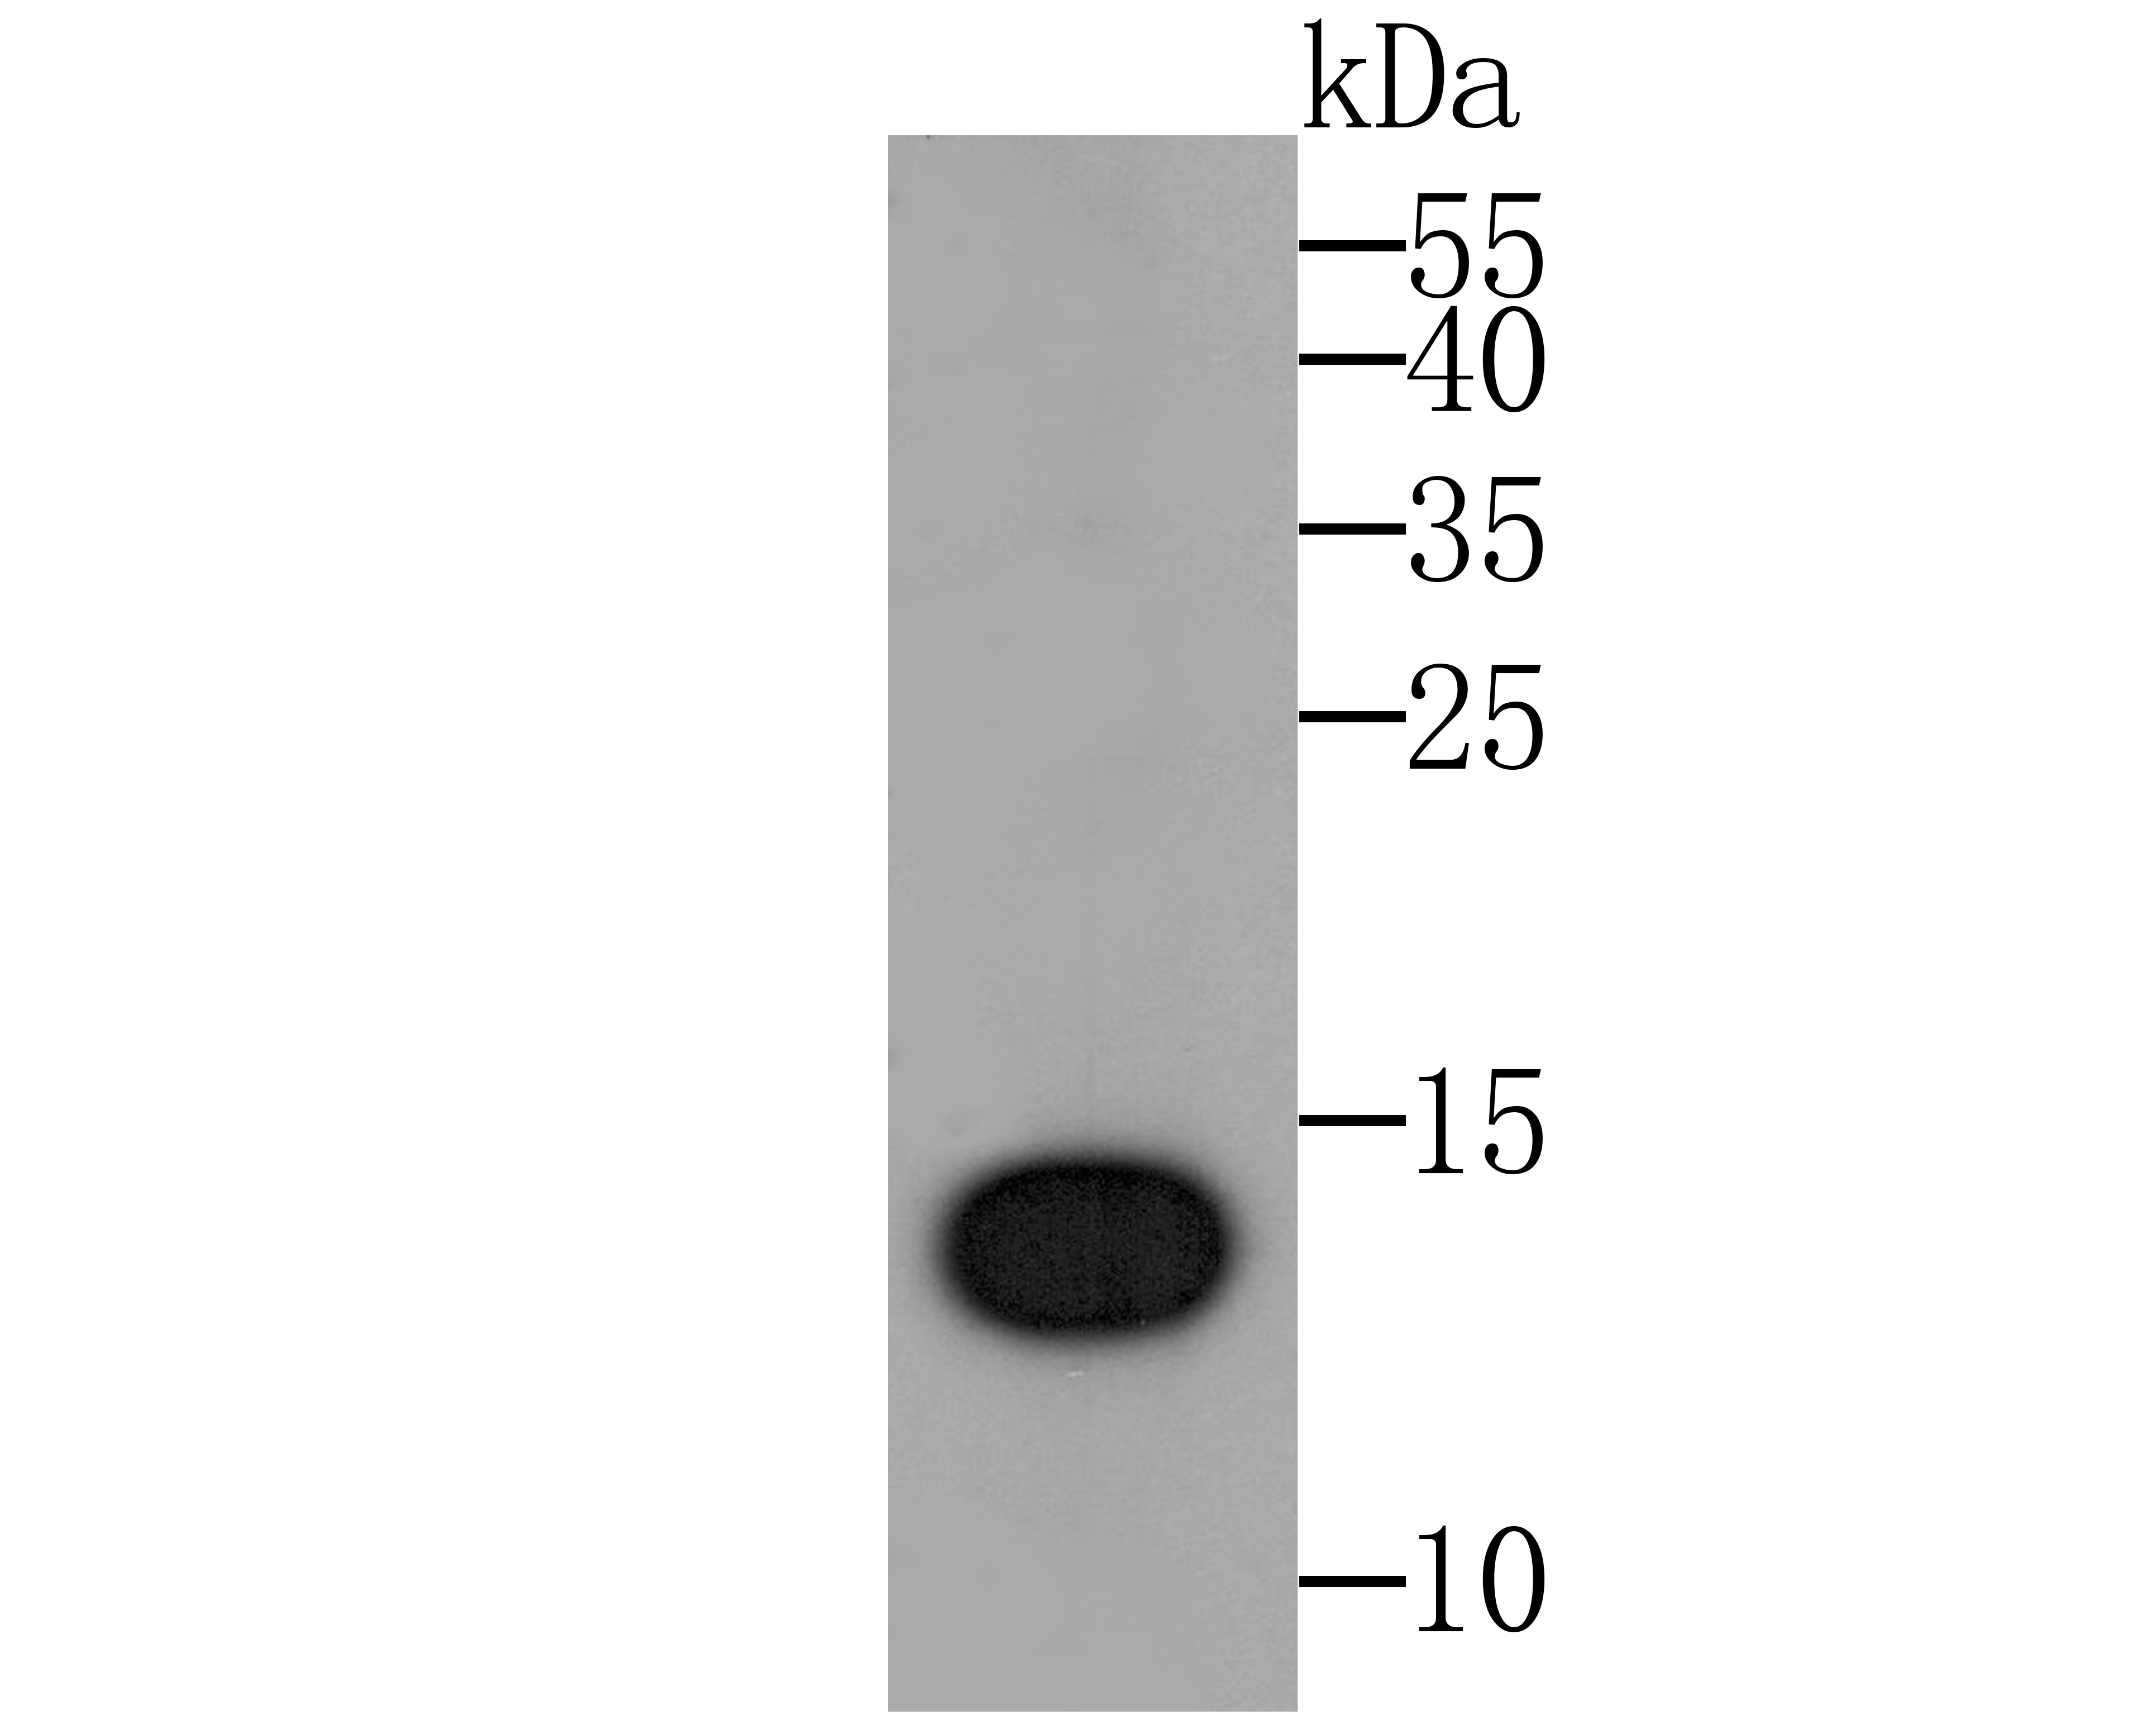 Western blot analysis of IL-22 on IL22  recombinant protein. Proteins were transferred to a PVDF membrane and blocked with 5% BSA in PBS for 1 hour at room temperature. The primary antibody was used at a 1:500 dilution in 5% BSA at room temperature for 2 hours. Goat Anti-Rabbit IgG - HRP Secondary Antibody (HA1001) at 1:5,000 dilution was used for 1 hour at room temperature.